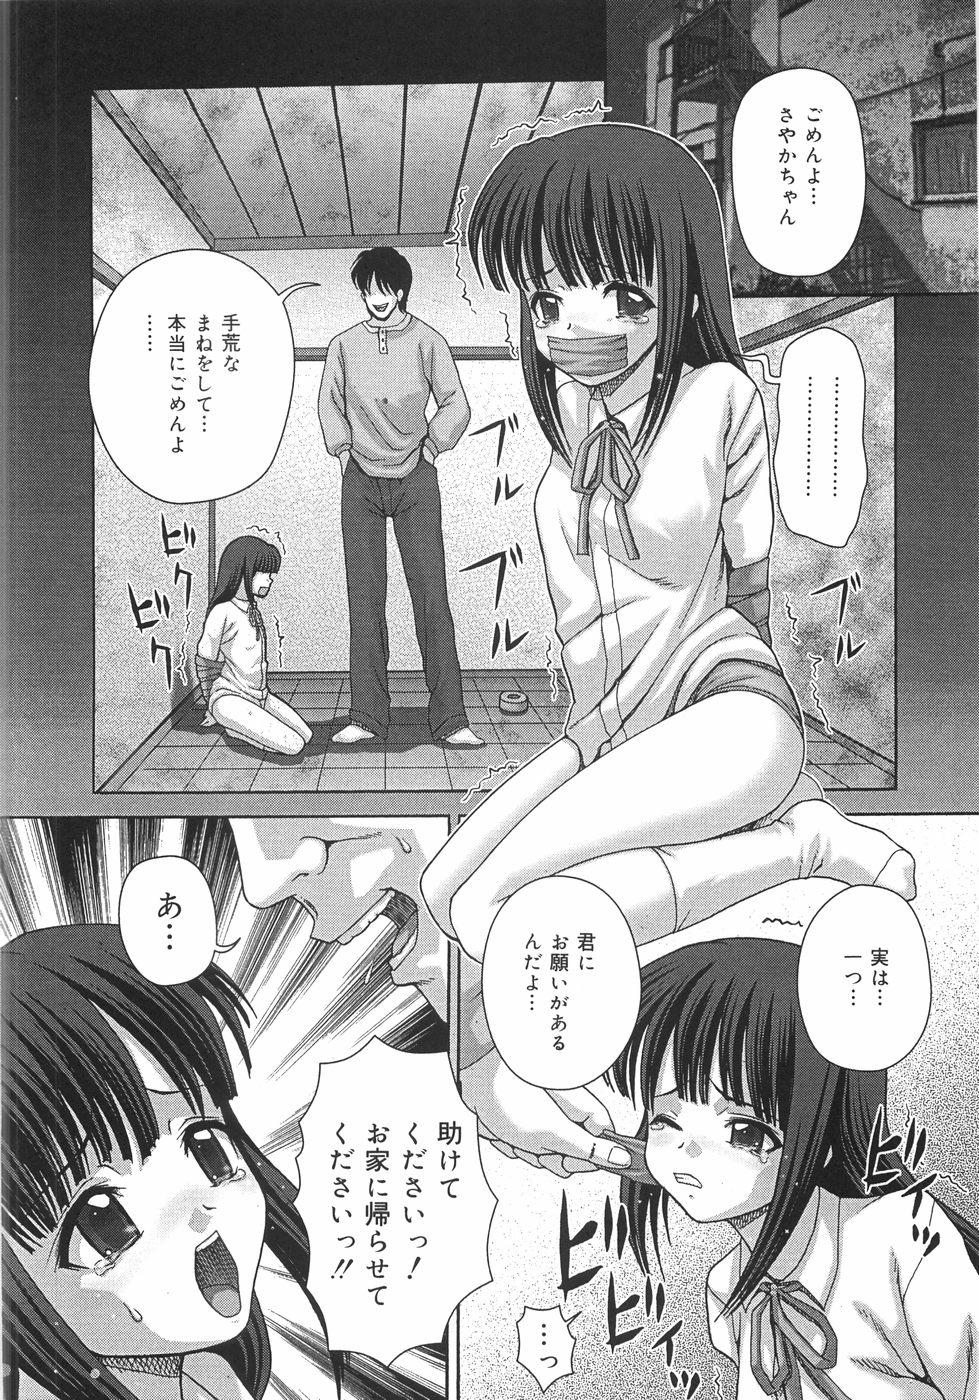 Toilet no Omocha - The Toy of the Rest Room 144